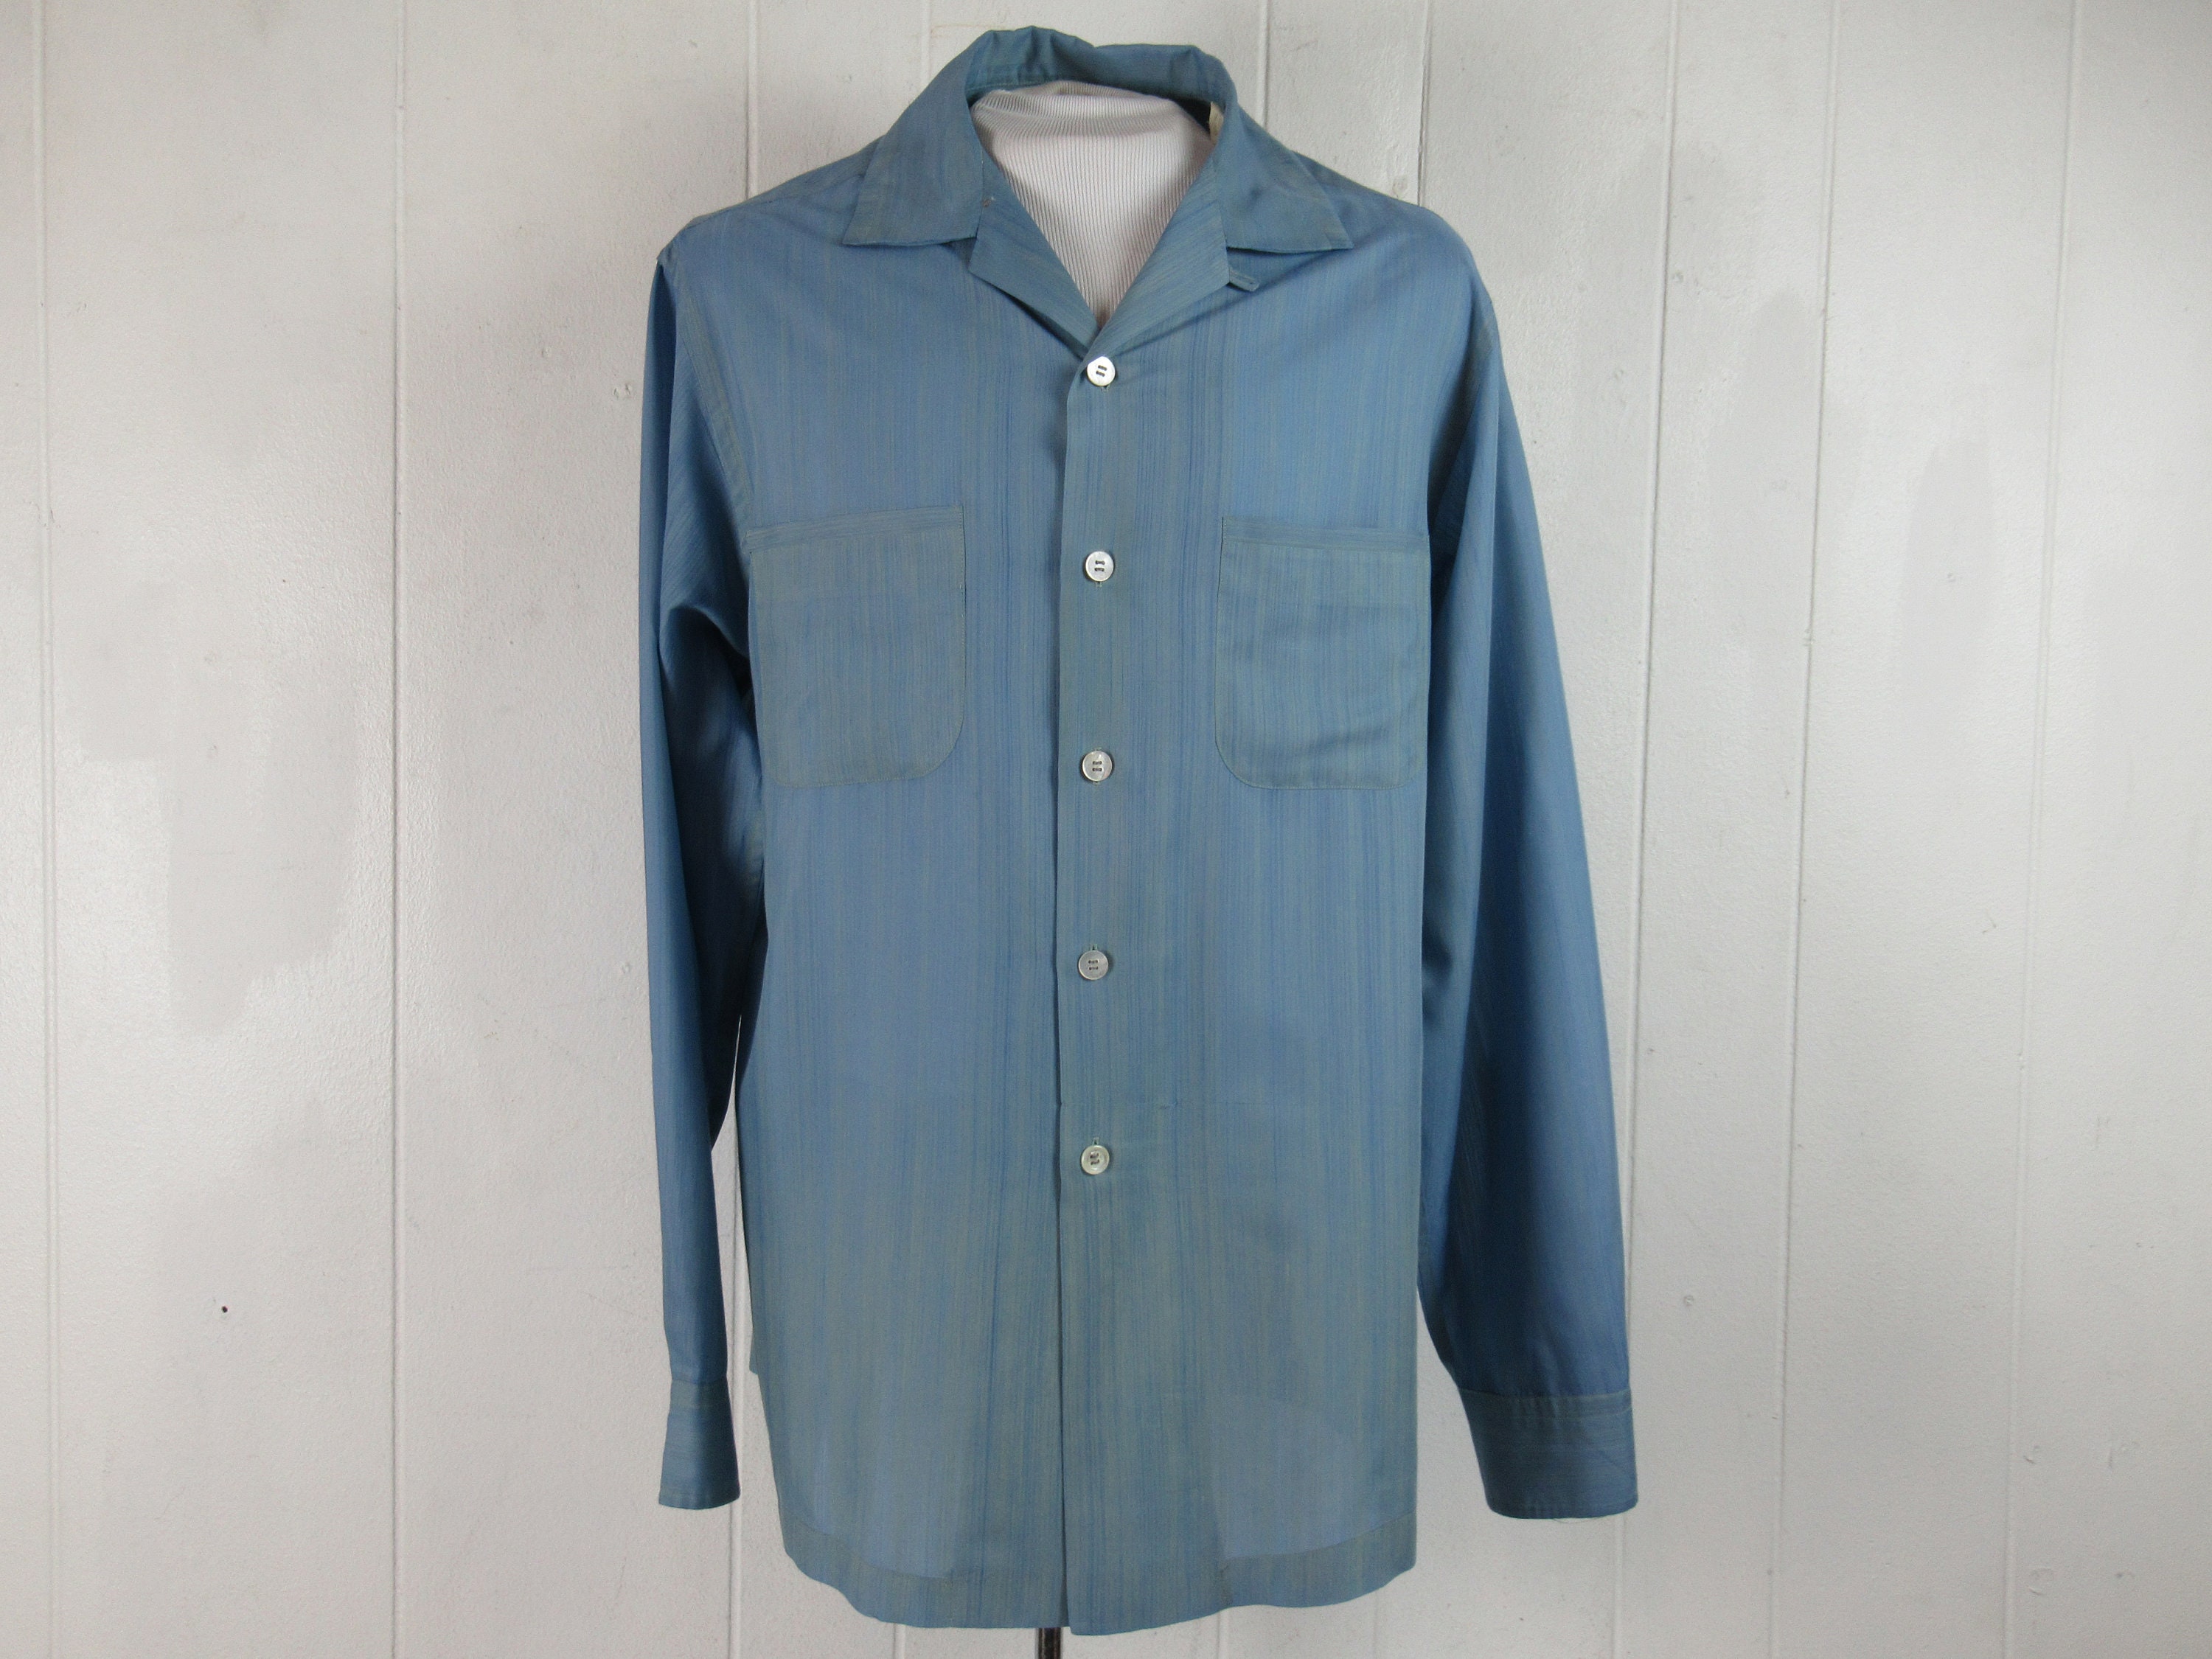 Buy 90s Shirt Couture Christian Dior Chemise/christian Dior Online